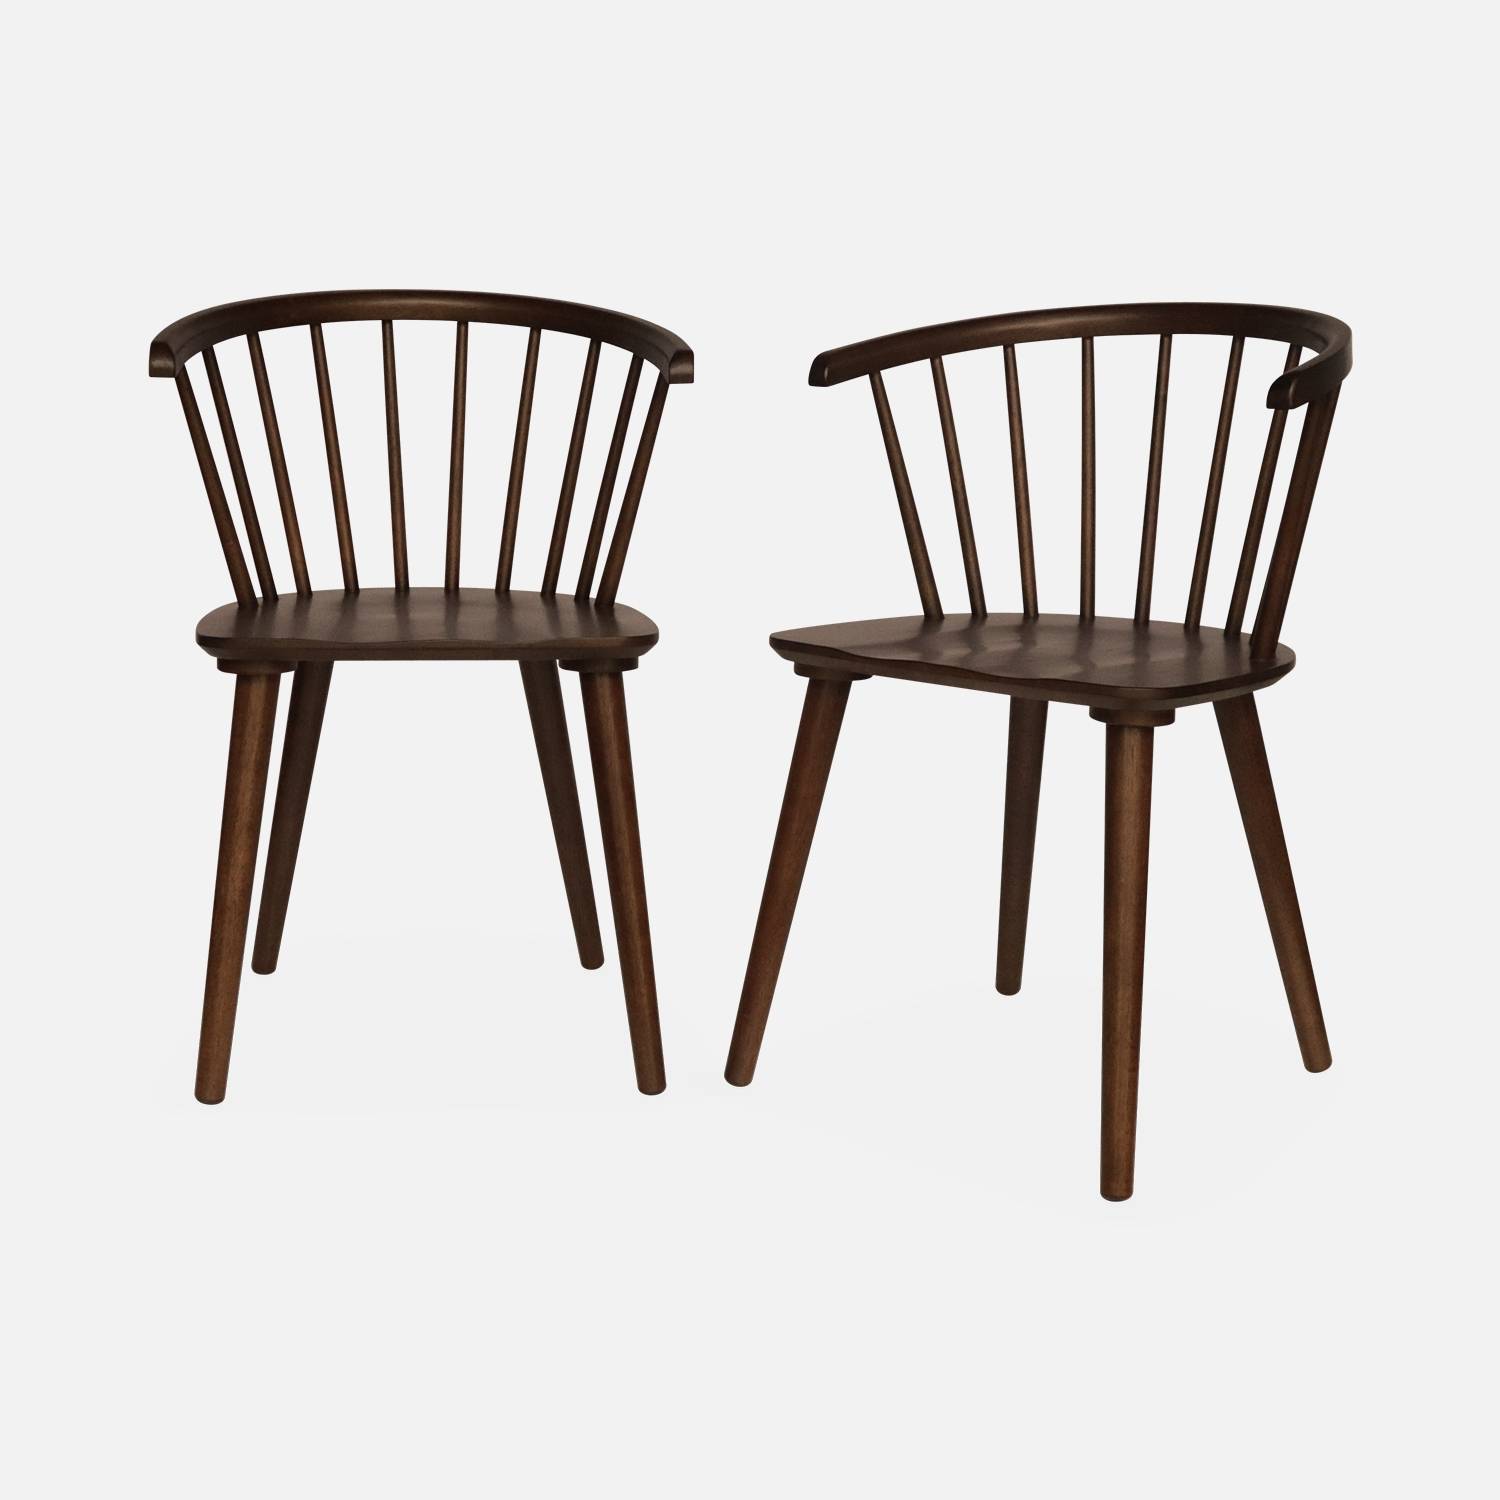 Pair of Wood and Plywood Spindle Chairs, dark wood, L53 x W47.5 x H76cm | sweeek